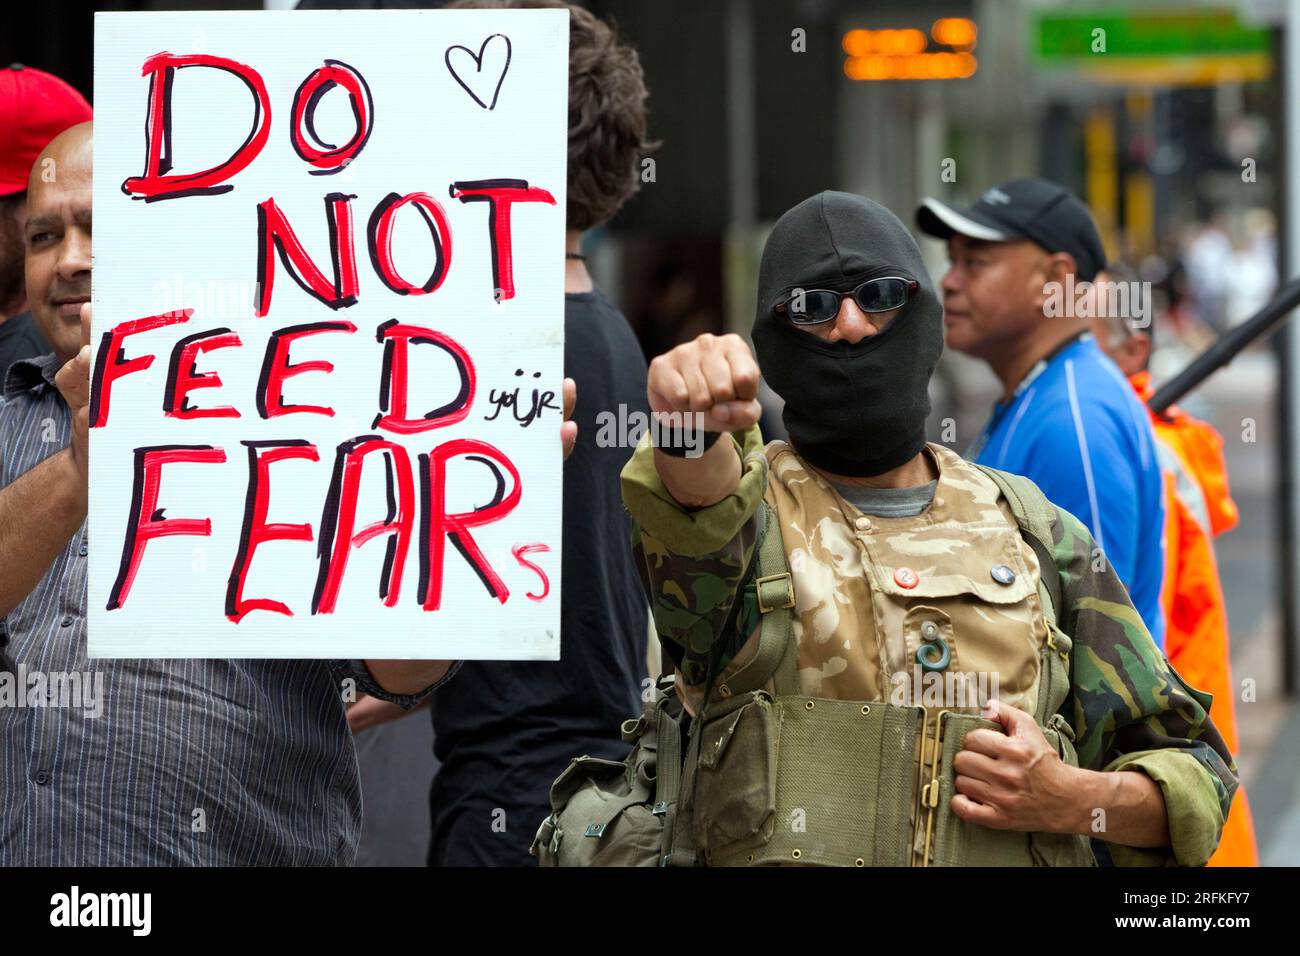 A protestor dressed in Army khaki uniform points with his fist as another holds a banner followed by other demonstrators. Stock Photo